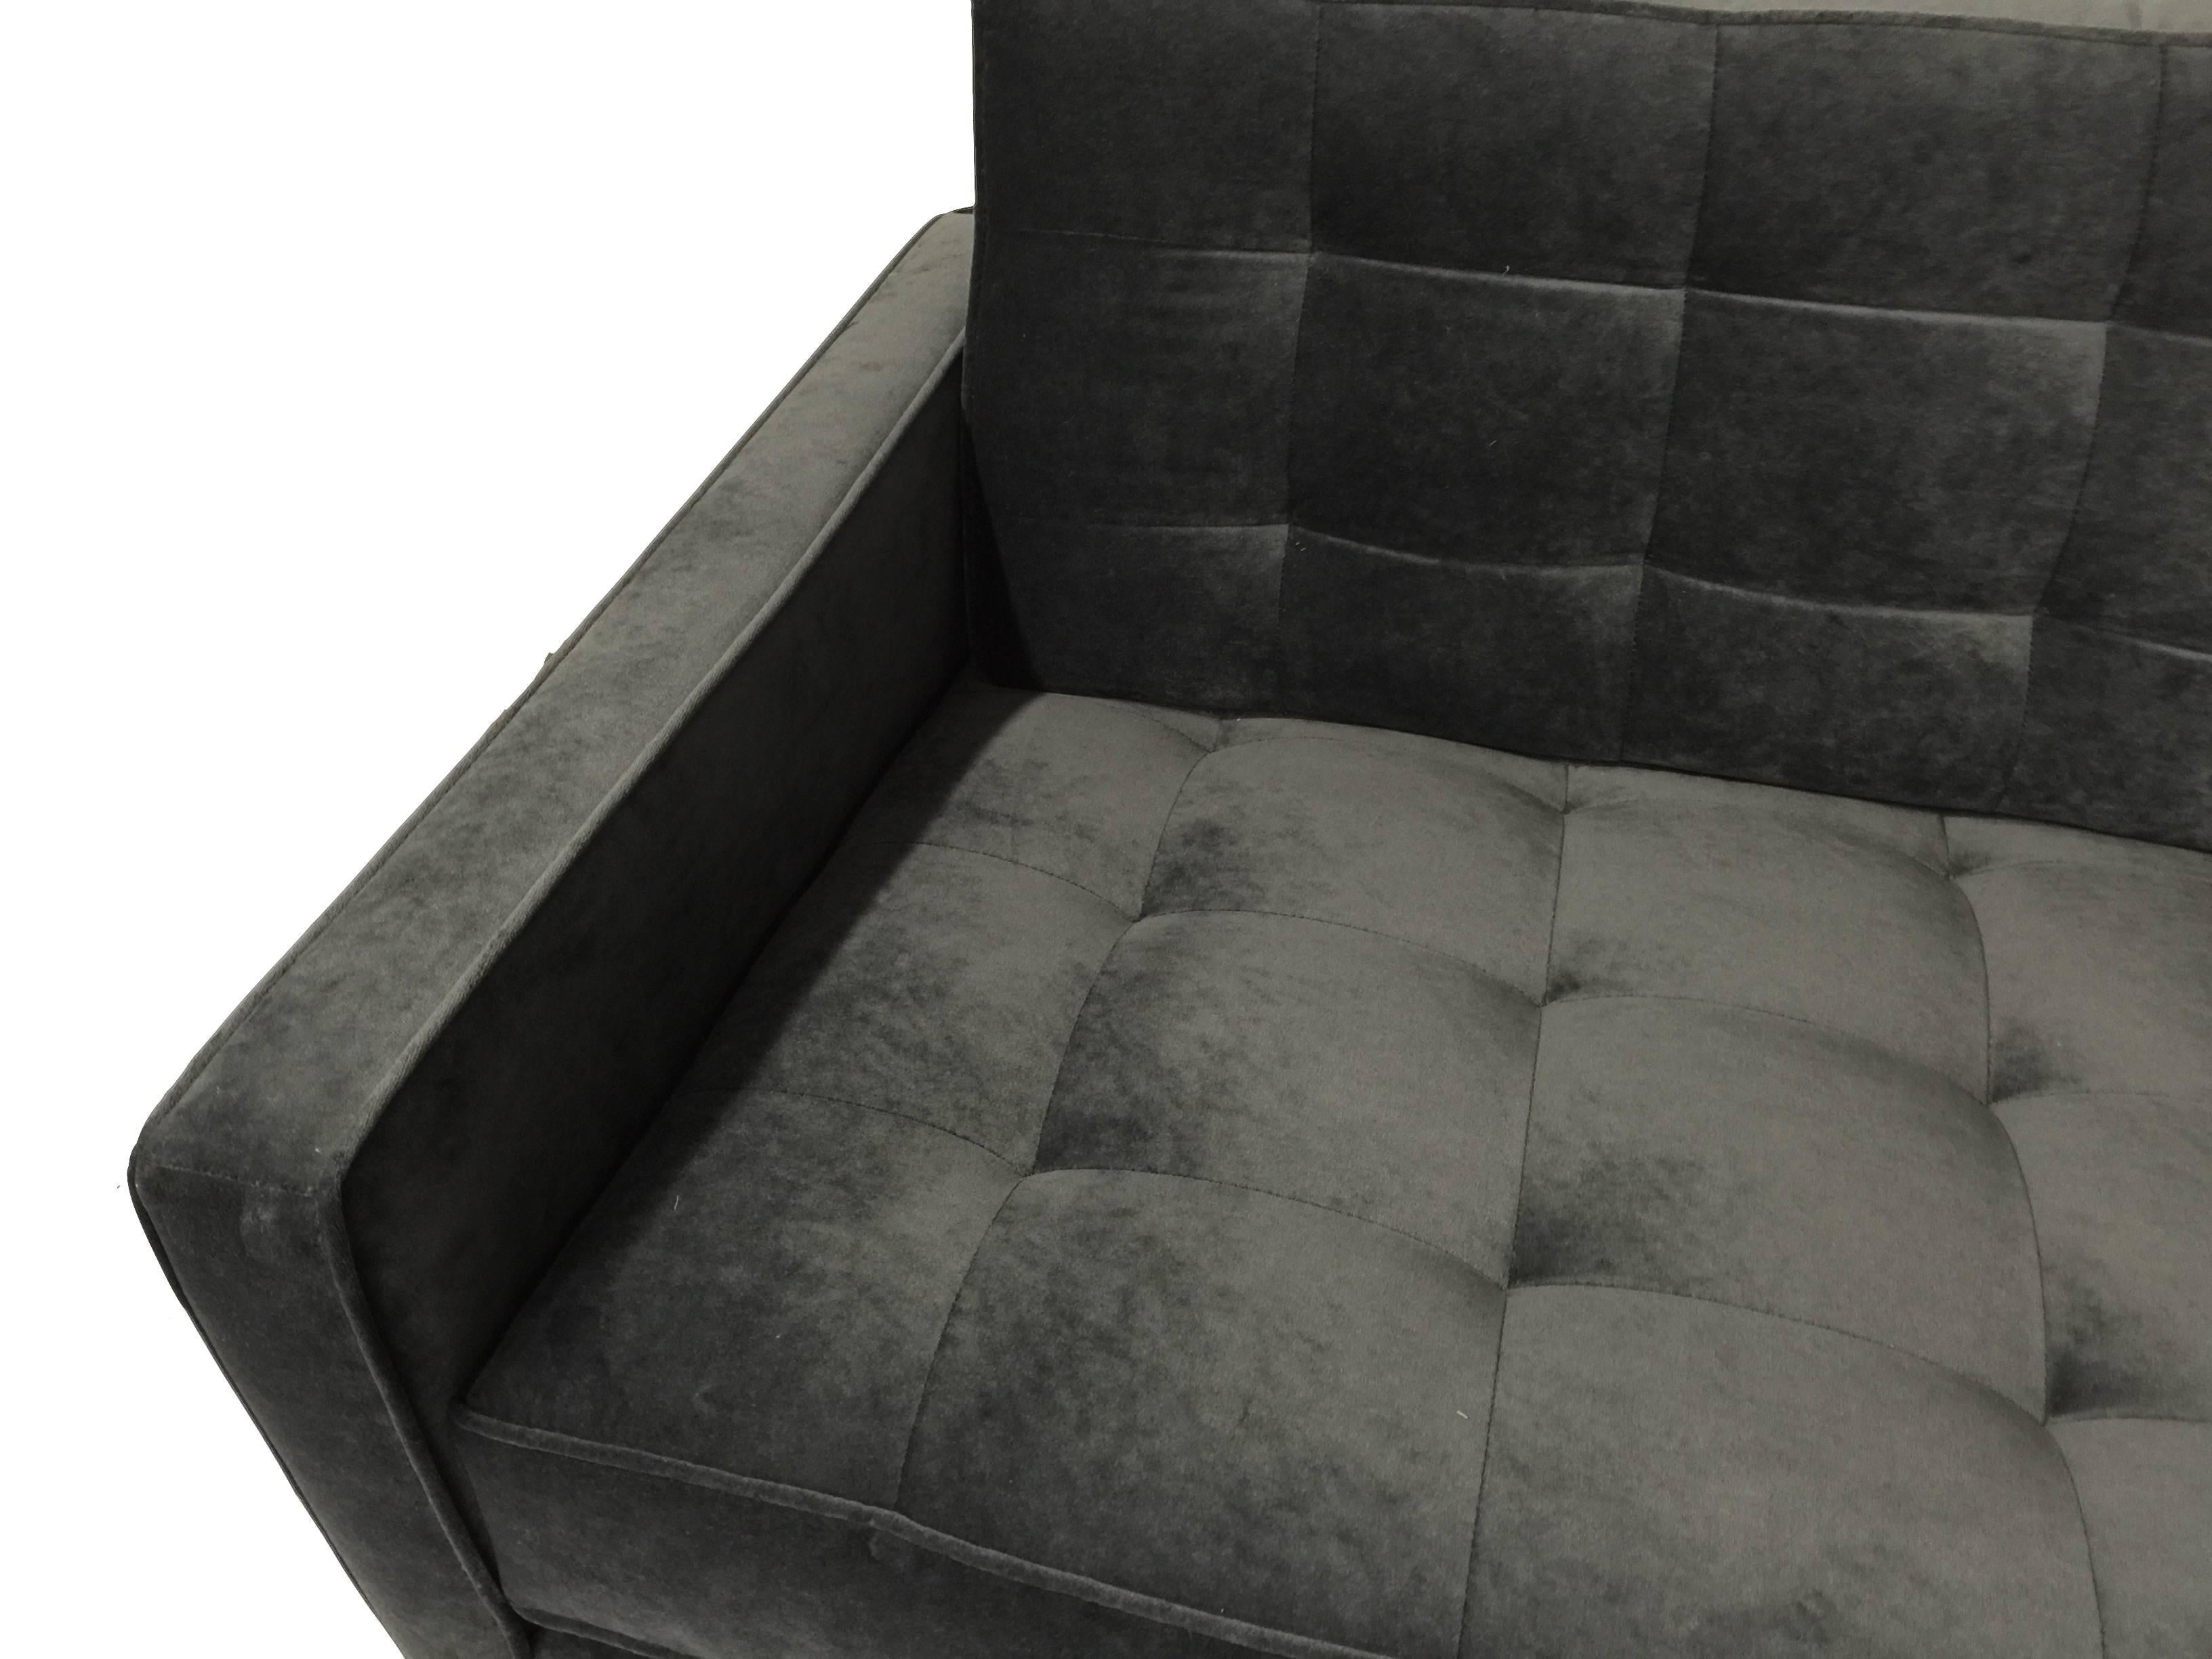 This loveseat is similar to the Florence Knoll sofa.
It is newly upholstered in gun metal gray velvet with a tufted stitch.
Base is polished chrome.